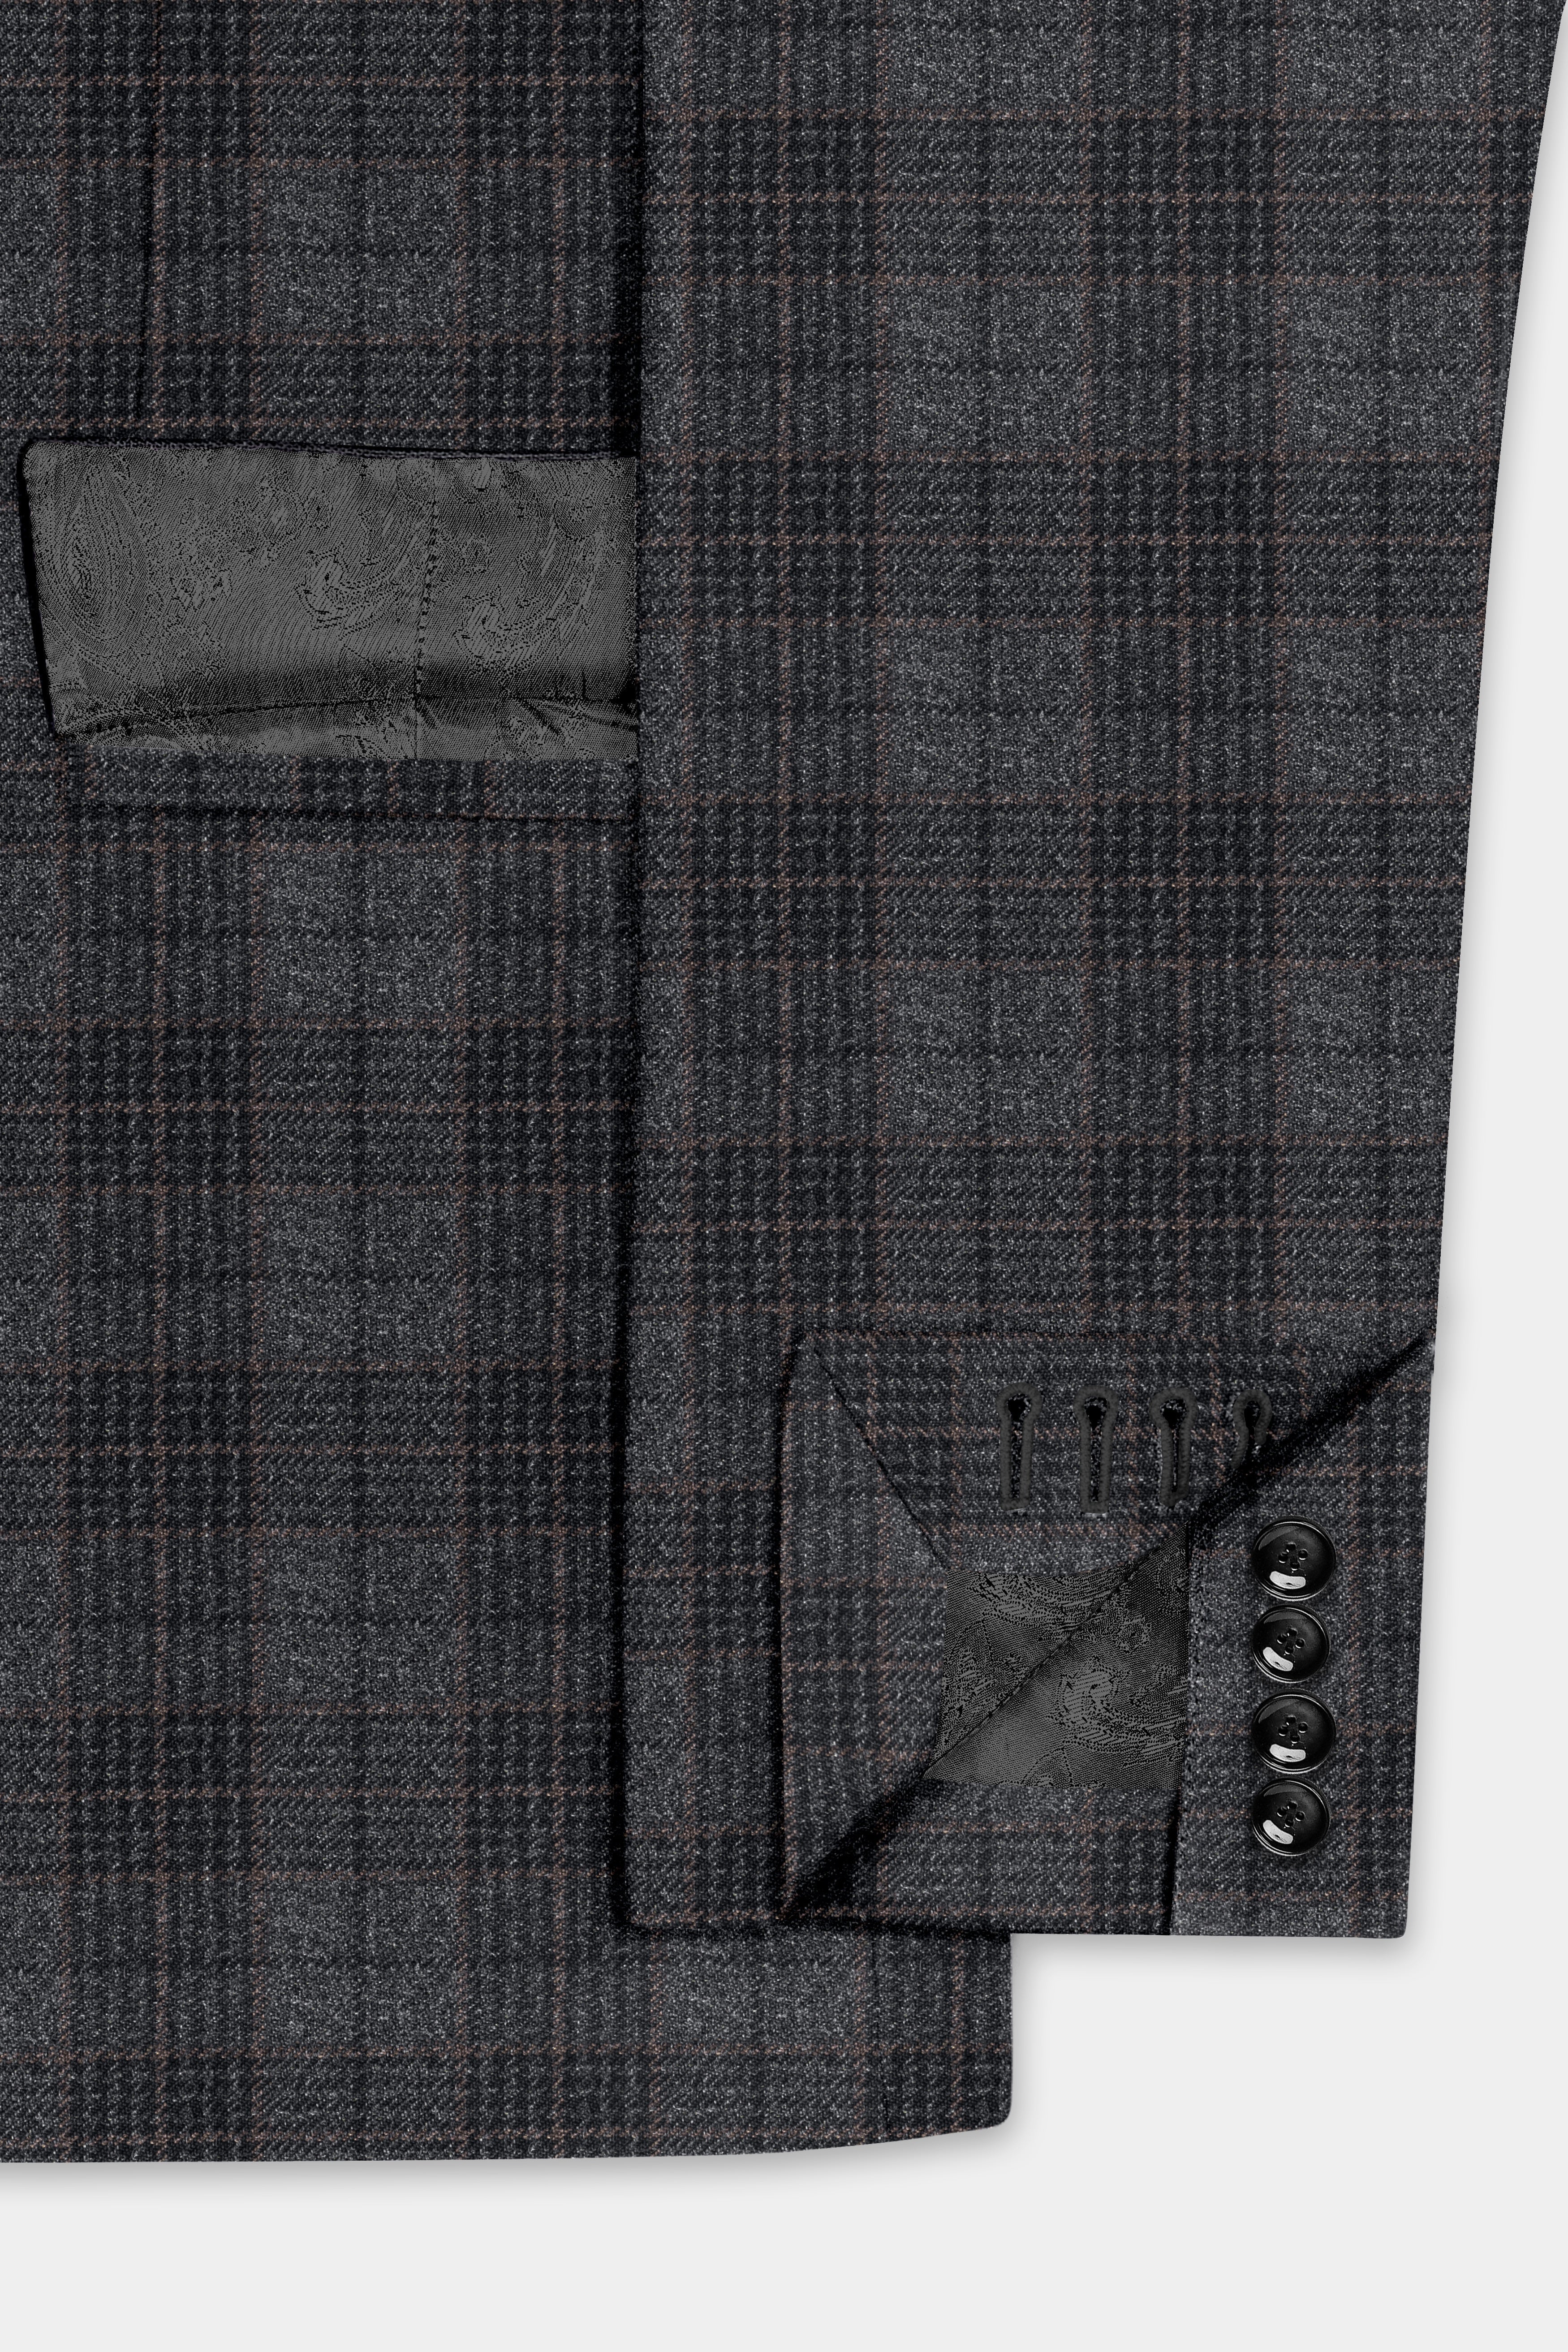 Charcoal Gray Plaid Tweed Suit